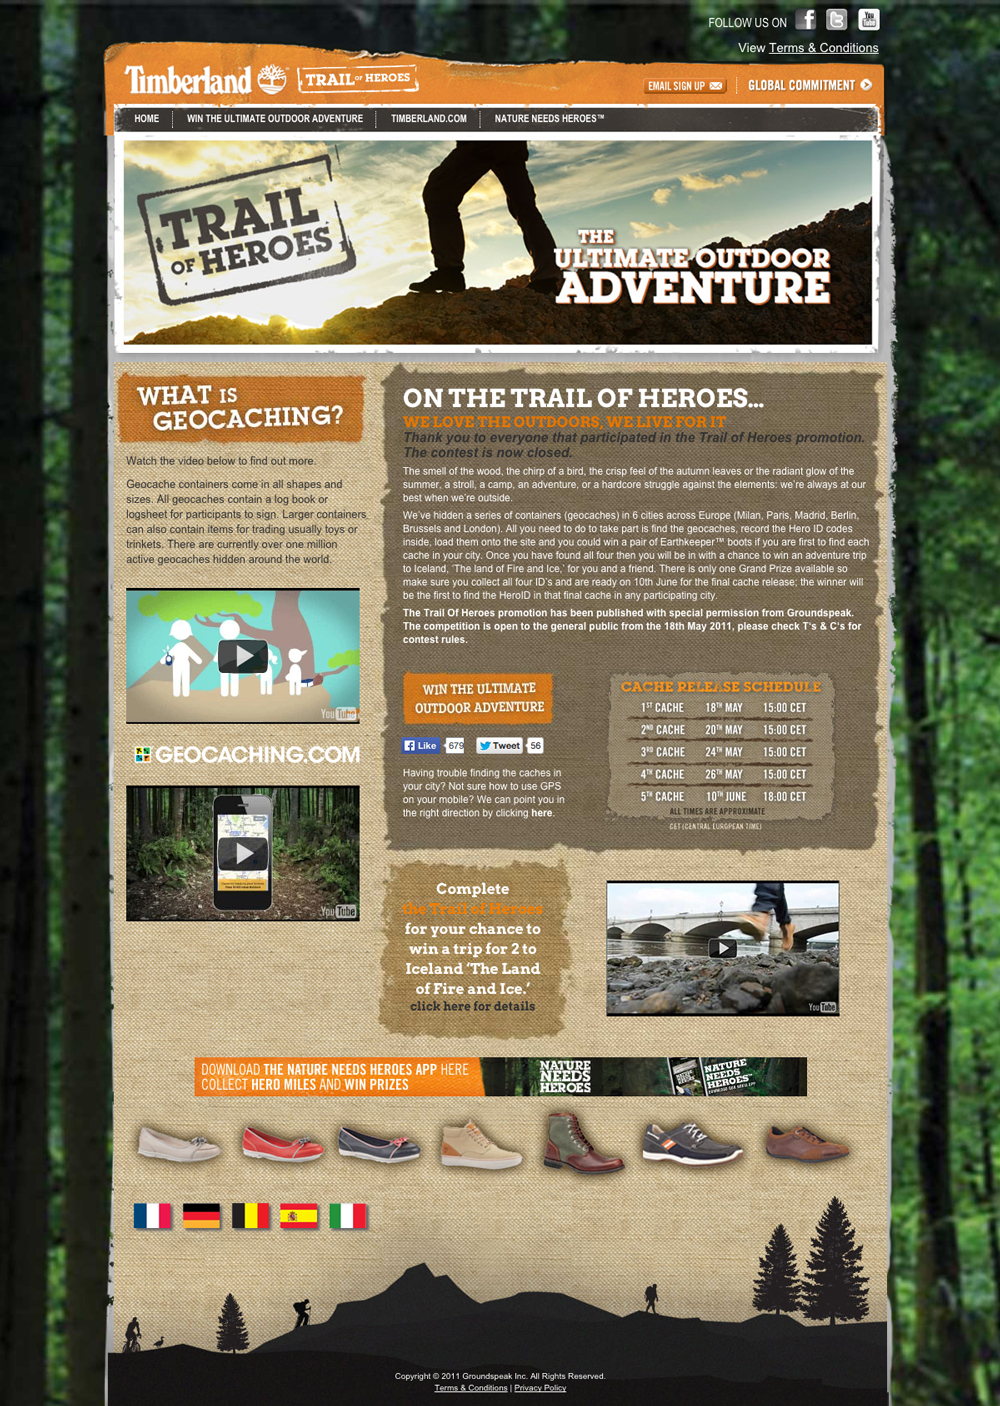 Timberland Trail of Heroes Landing Page